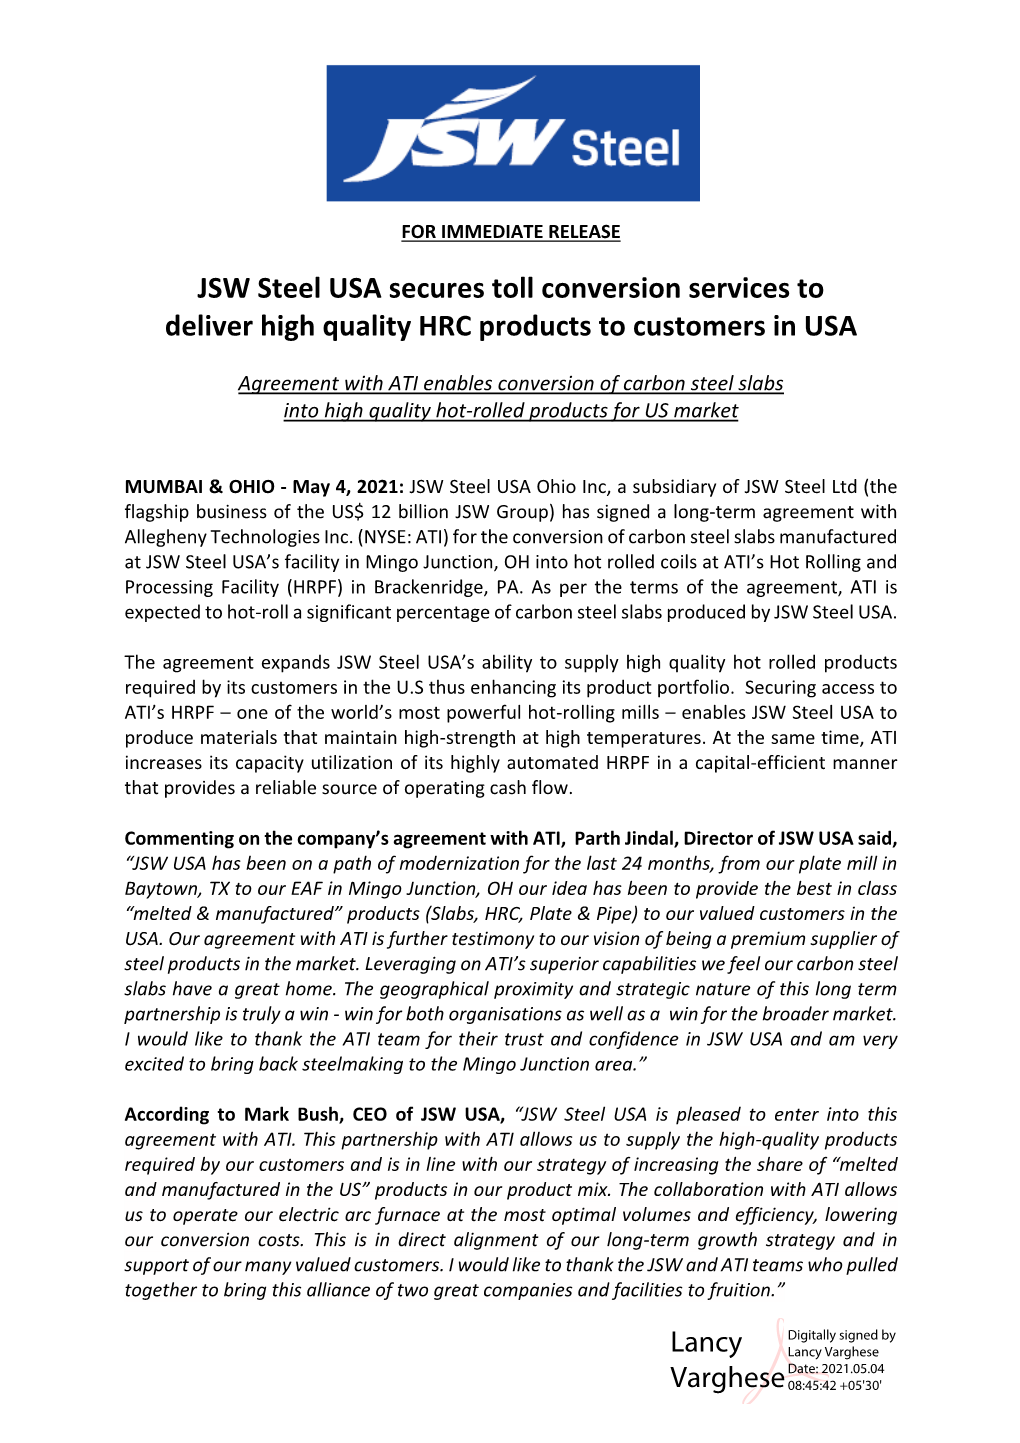 JSW Steel USA Secures Toll Conversion Services to Deliver High Quality HRC Products to Customers in USA